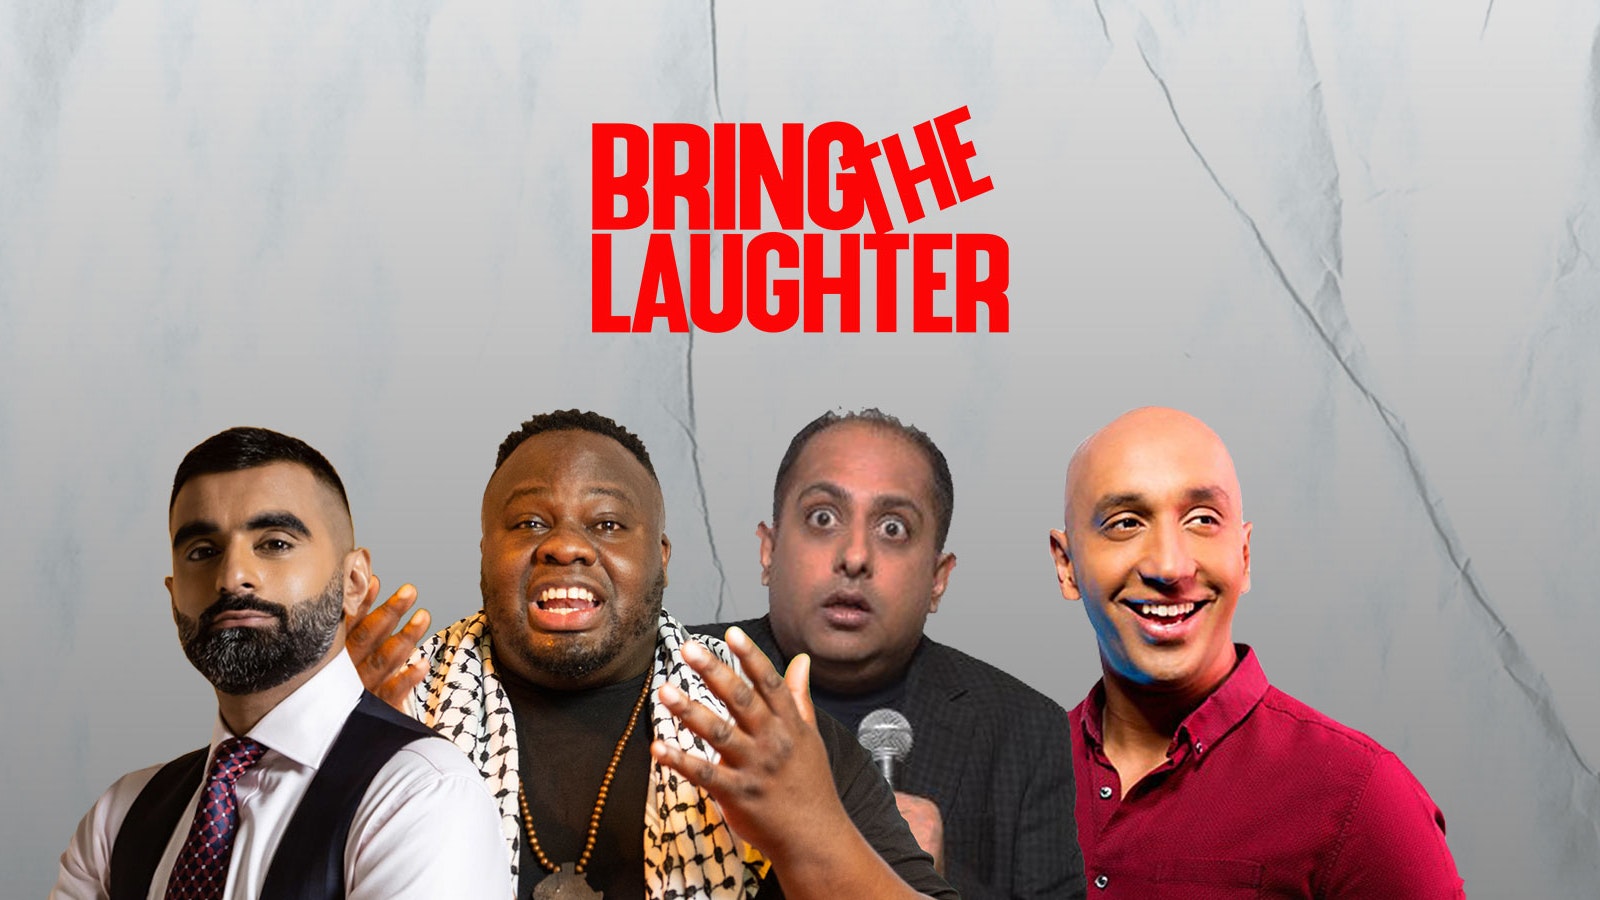 Bring The Laughter – Manchester